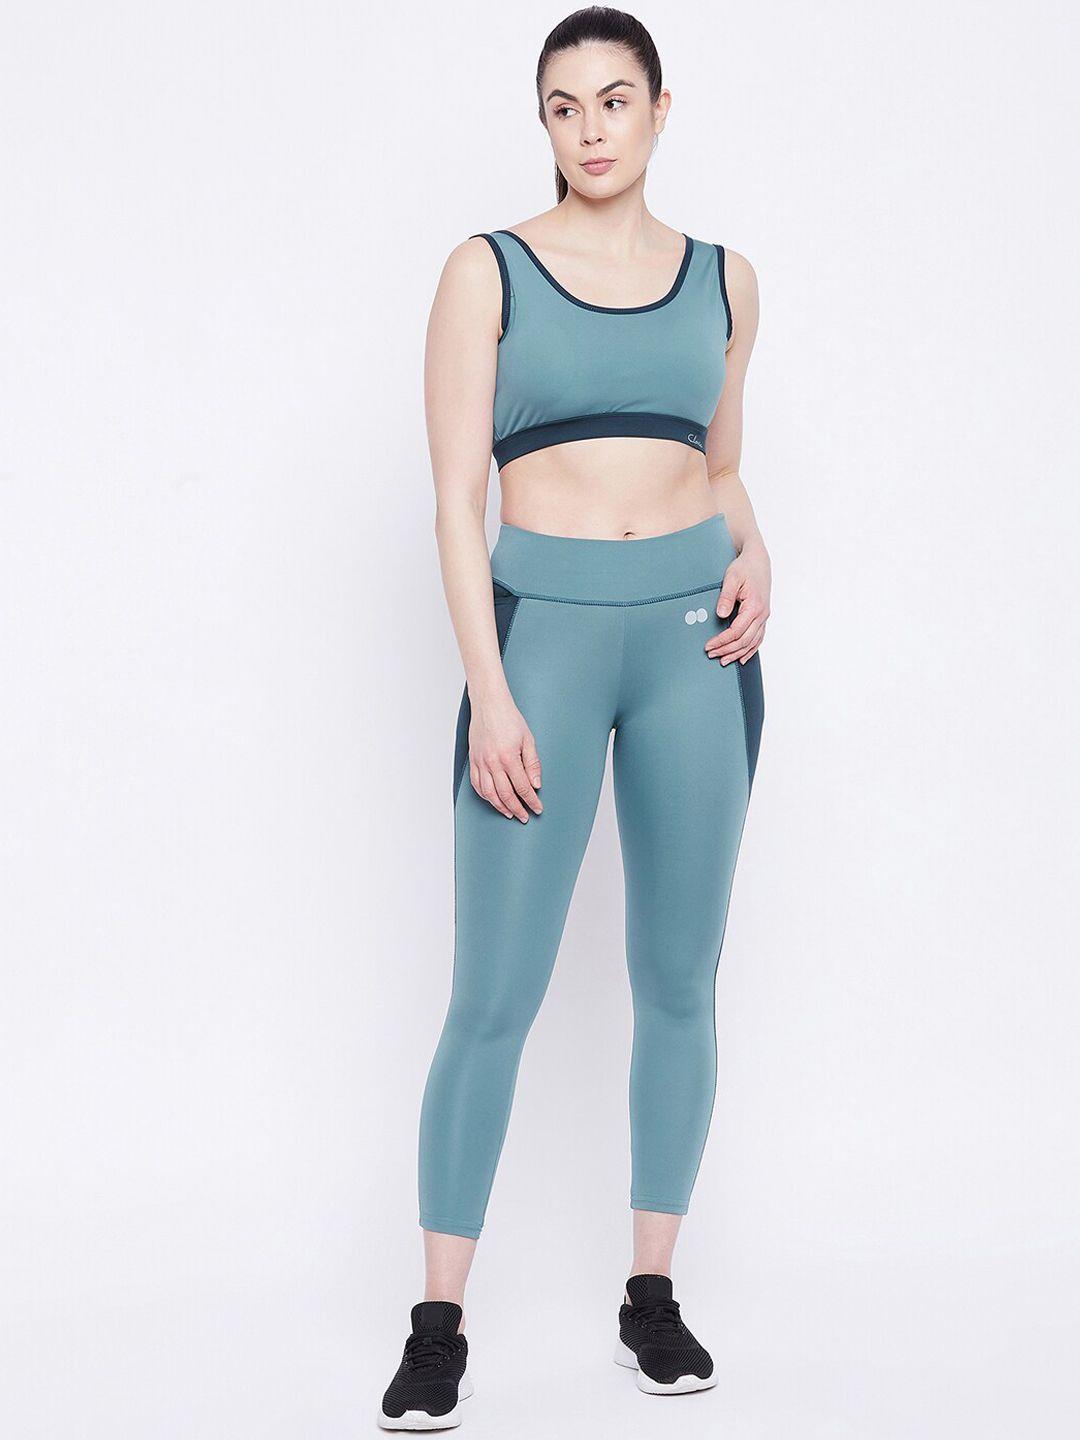 clovia women teal & black padded non wired sports bra with tights